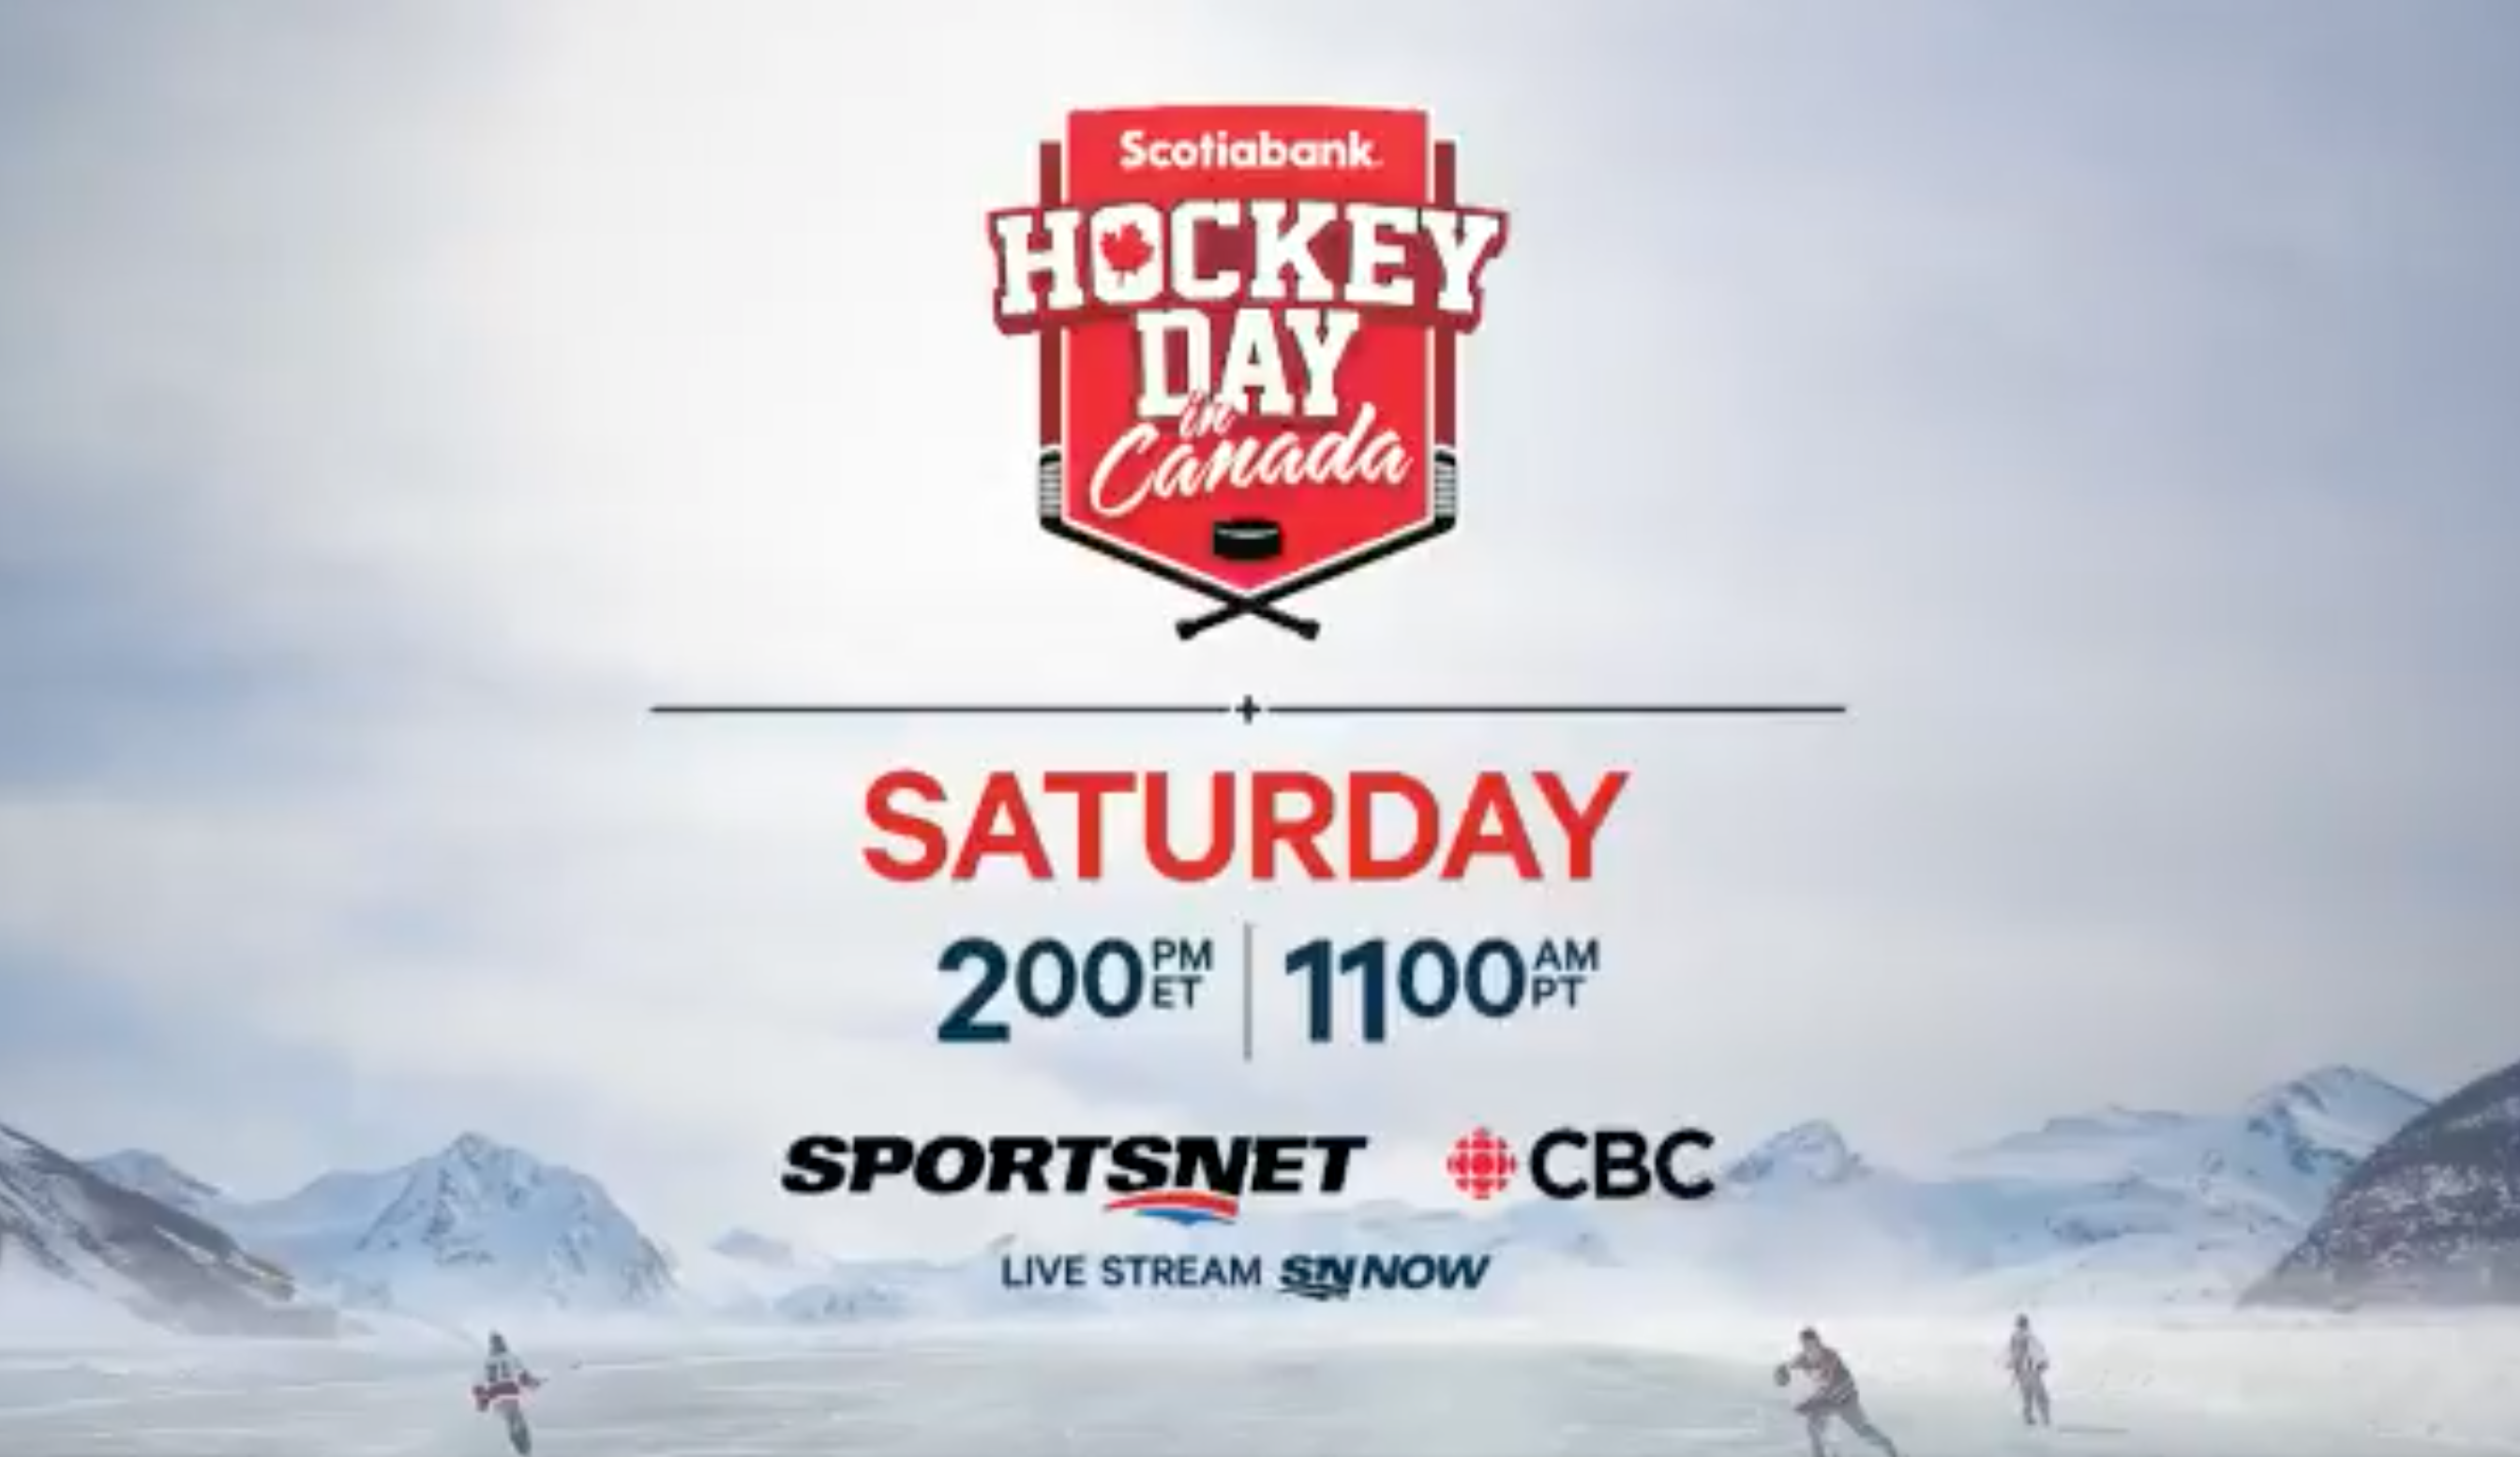 A Day for All Canadians 21st Annual Scotiabank Hockey Day In Canada Embraces Inclusion, February 13 on Sportsnet Rogers Sports and Media